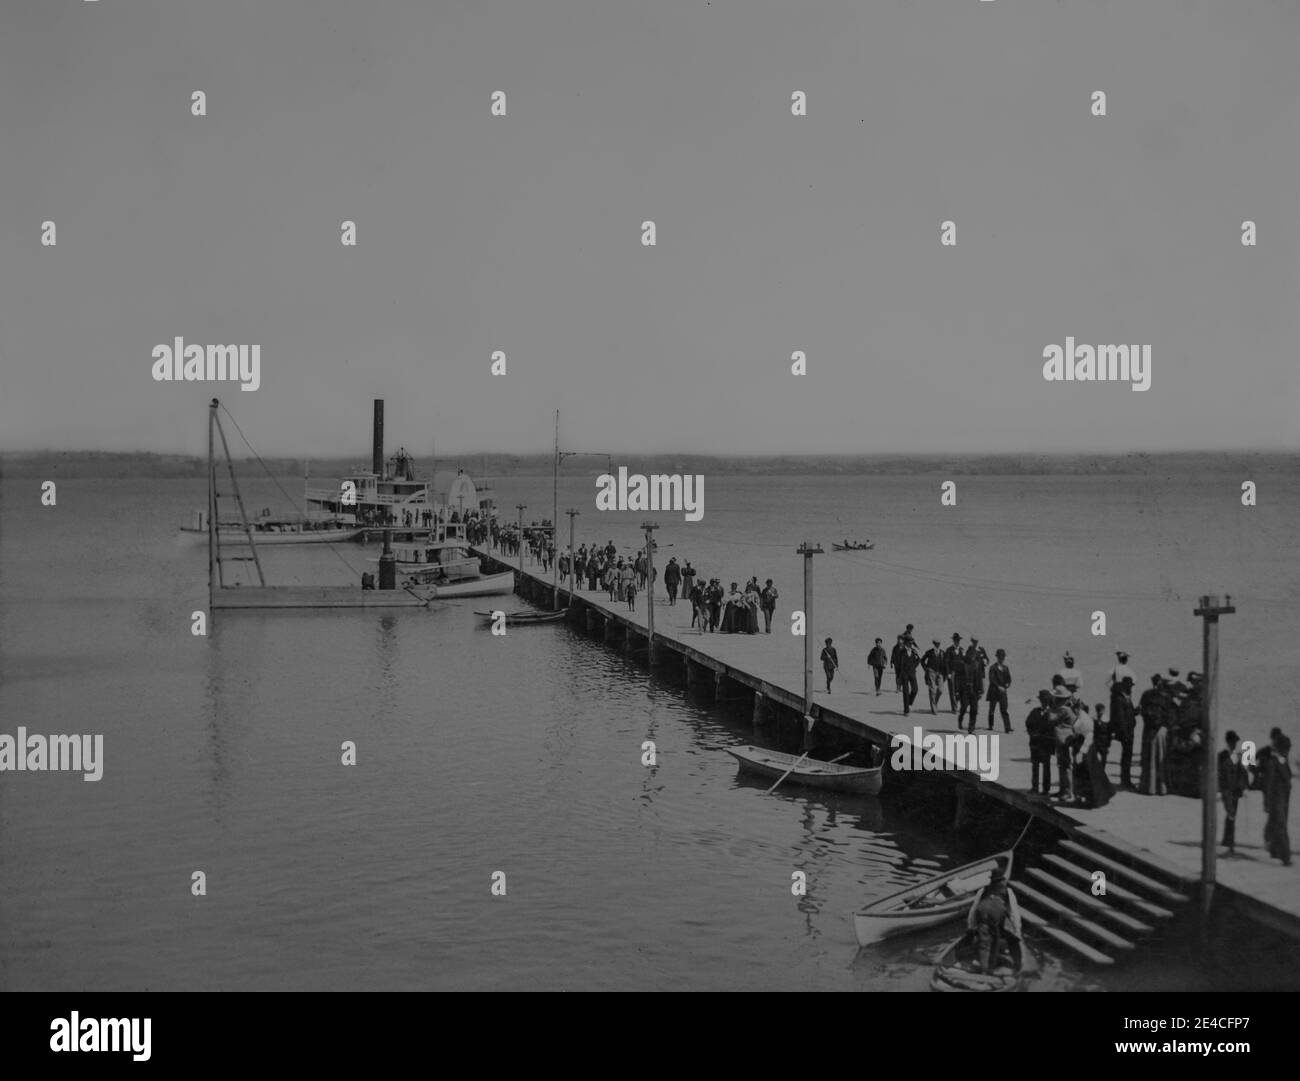 American archive monochrome photo of a paddle steamer on Lake Cayuga at end of a pier unloading passengers, dated May 30th 1896. Taken in the late 19th century in NY, USA Stock Photo